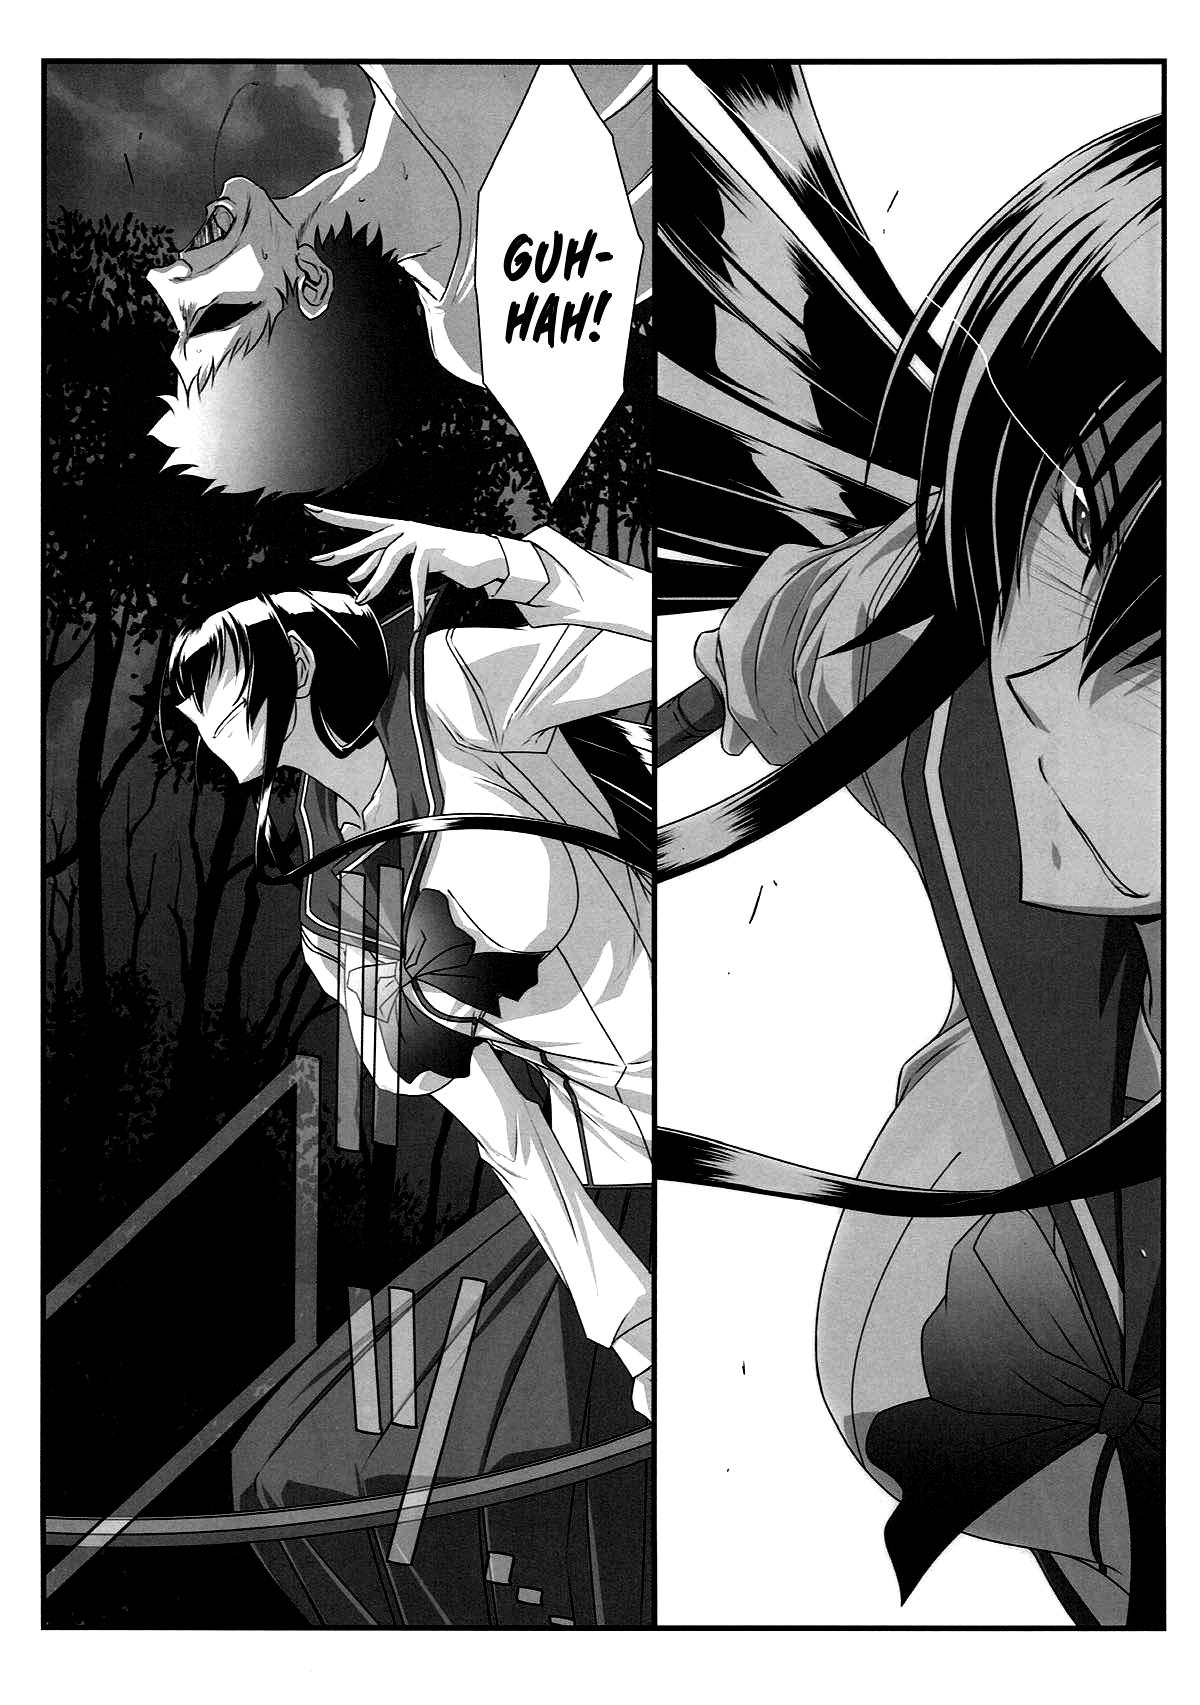 Hidden Camera SPIRAL ZONE H.O.T.D - Highschool of the dead Denmark - Page 4